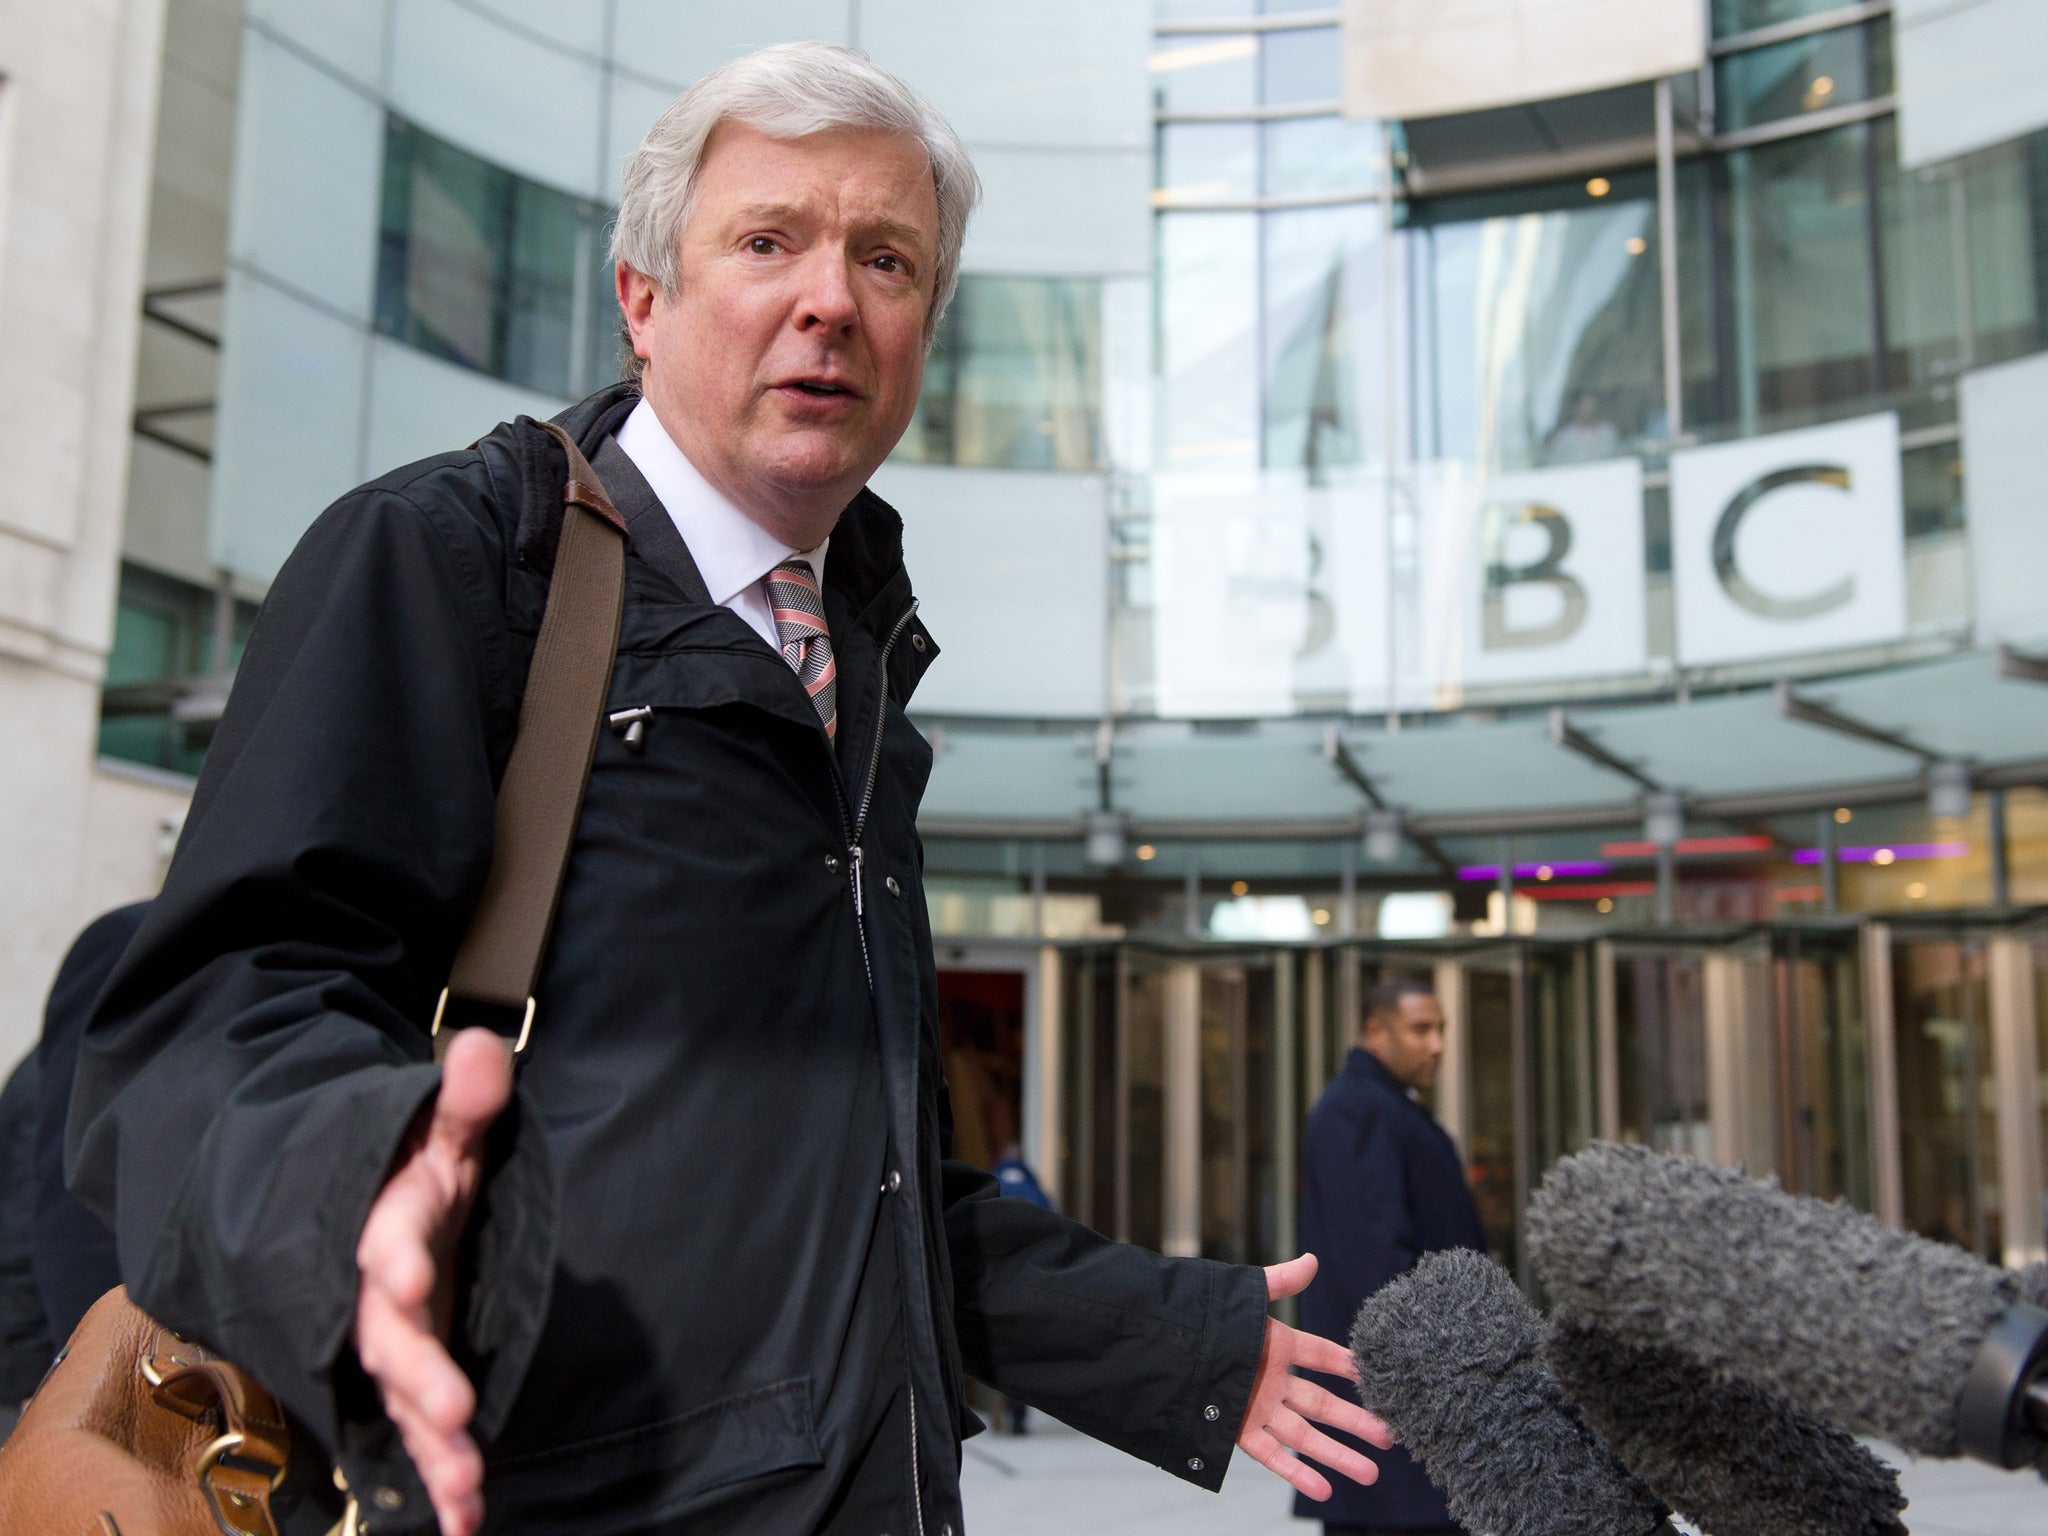 Tony Hall, Director General of the BBC, has reportedly received a death threat in relation to the decision to axe Jeremy Clarkson